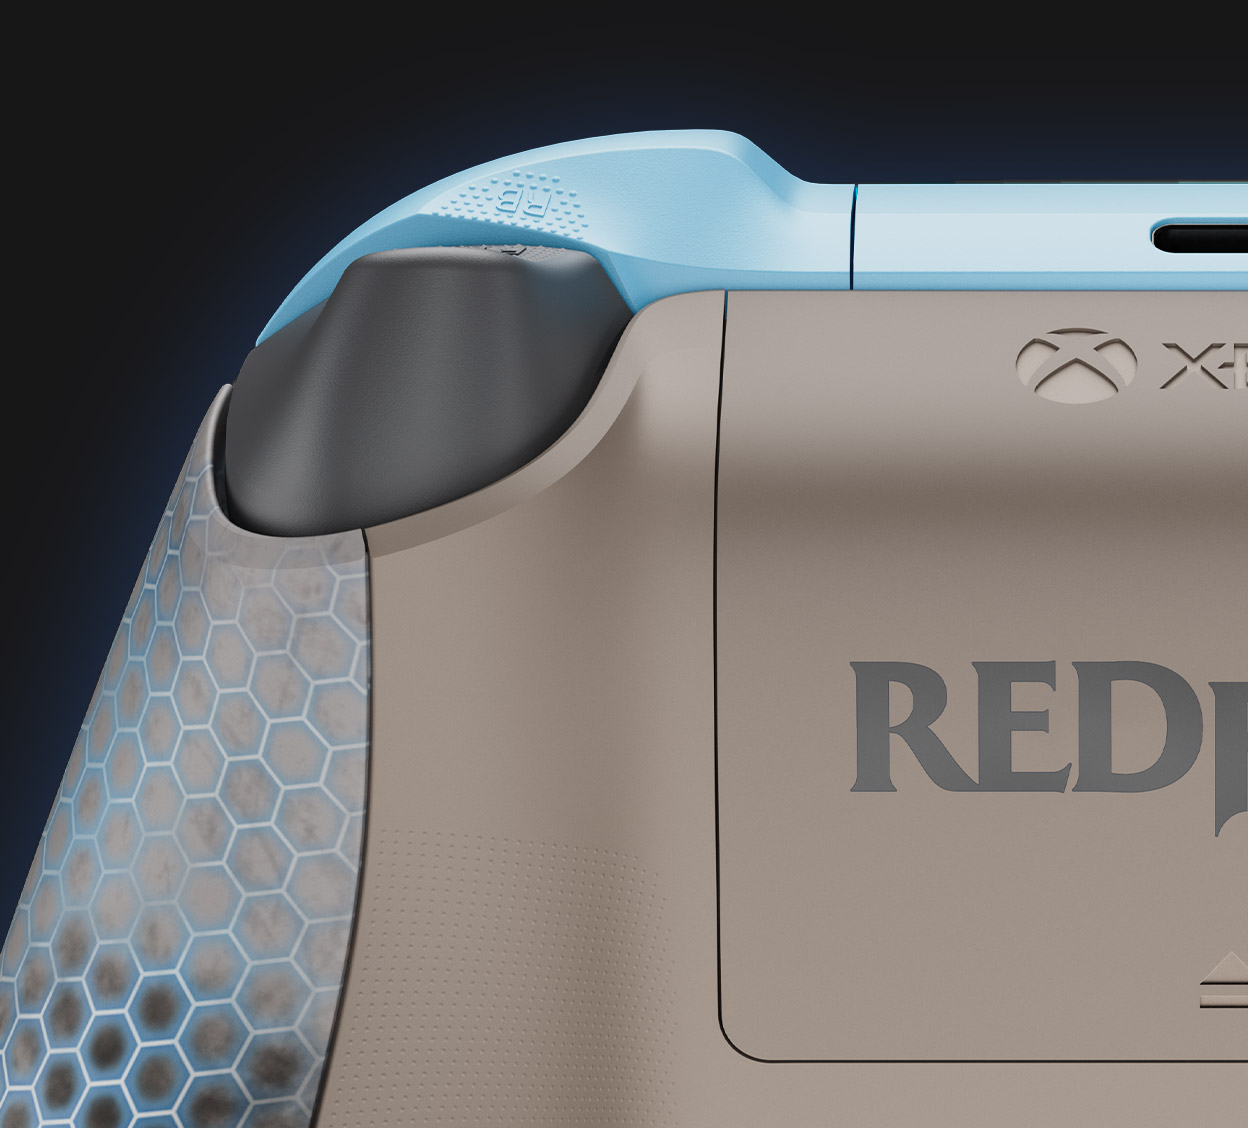 Back view of a Redfall Limited Edition controller design, featuring customized triggers, bumpers, and a battery door.